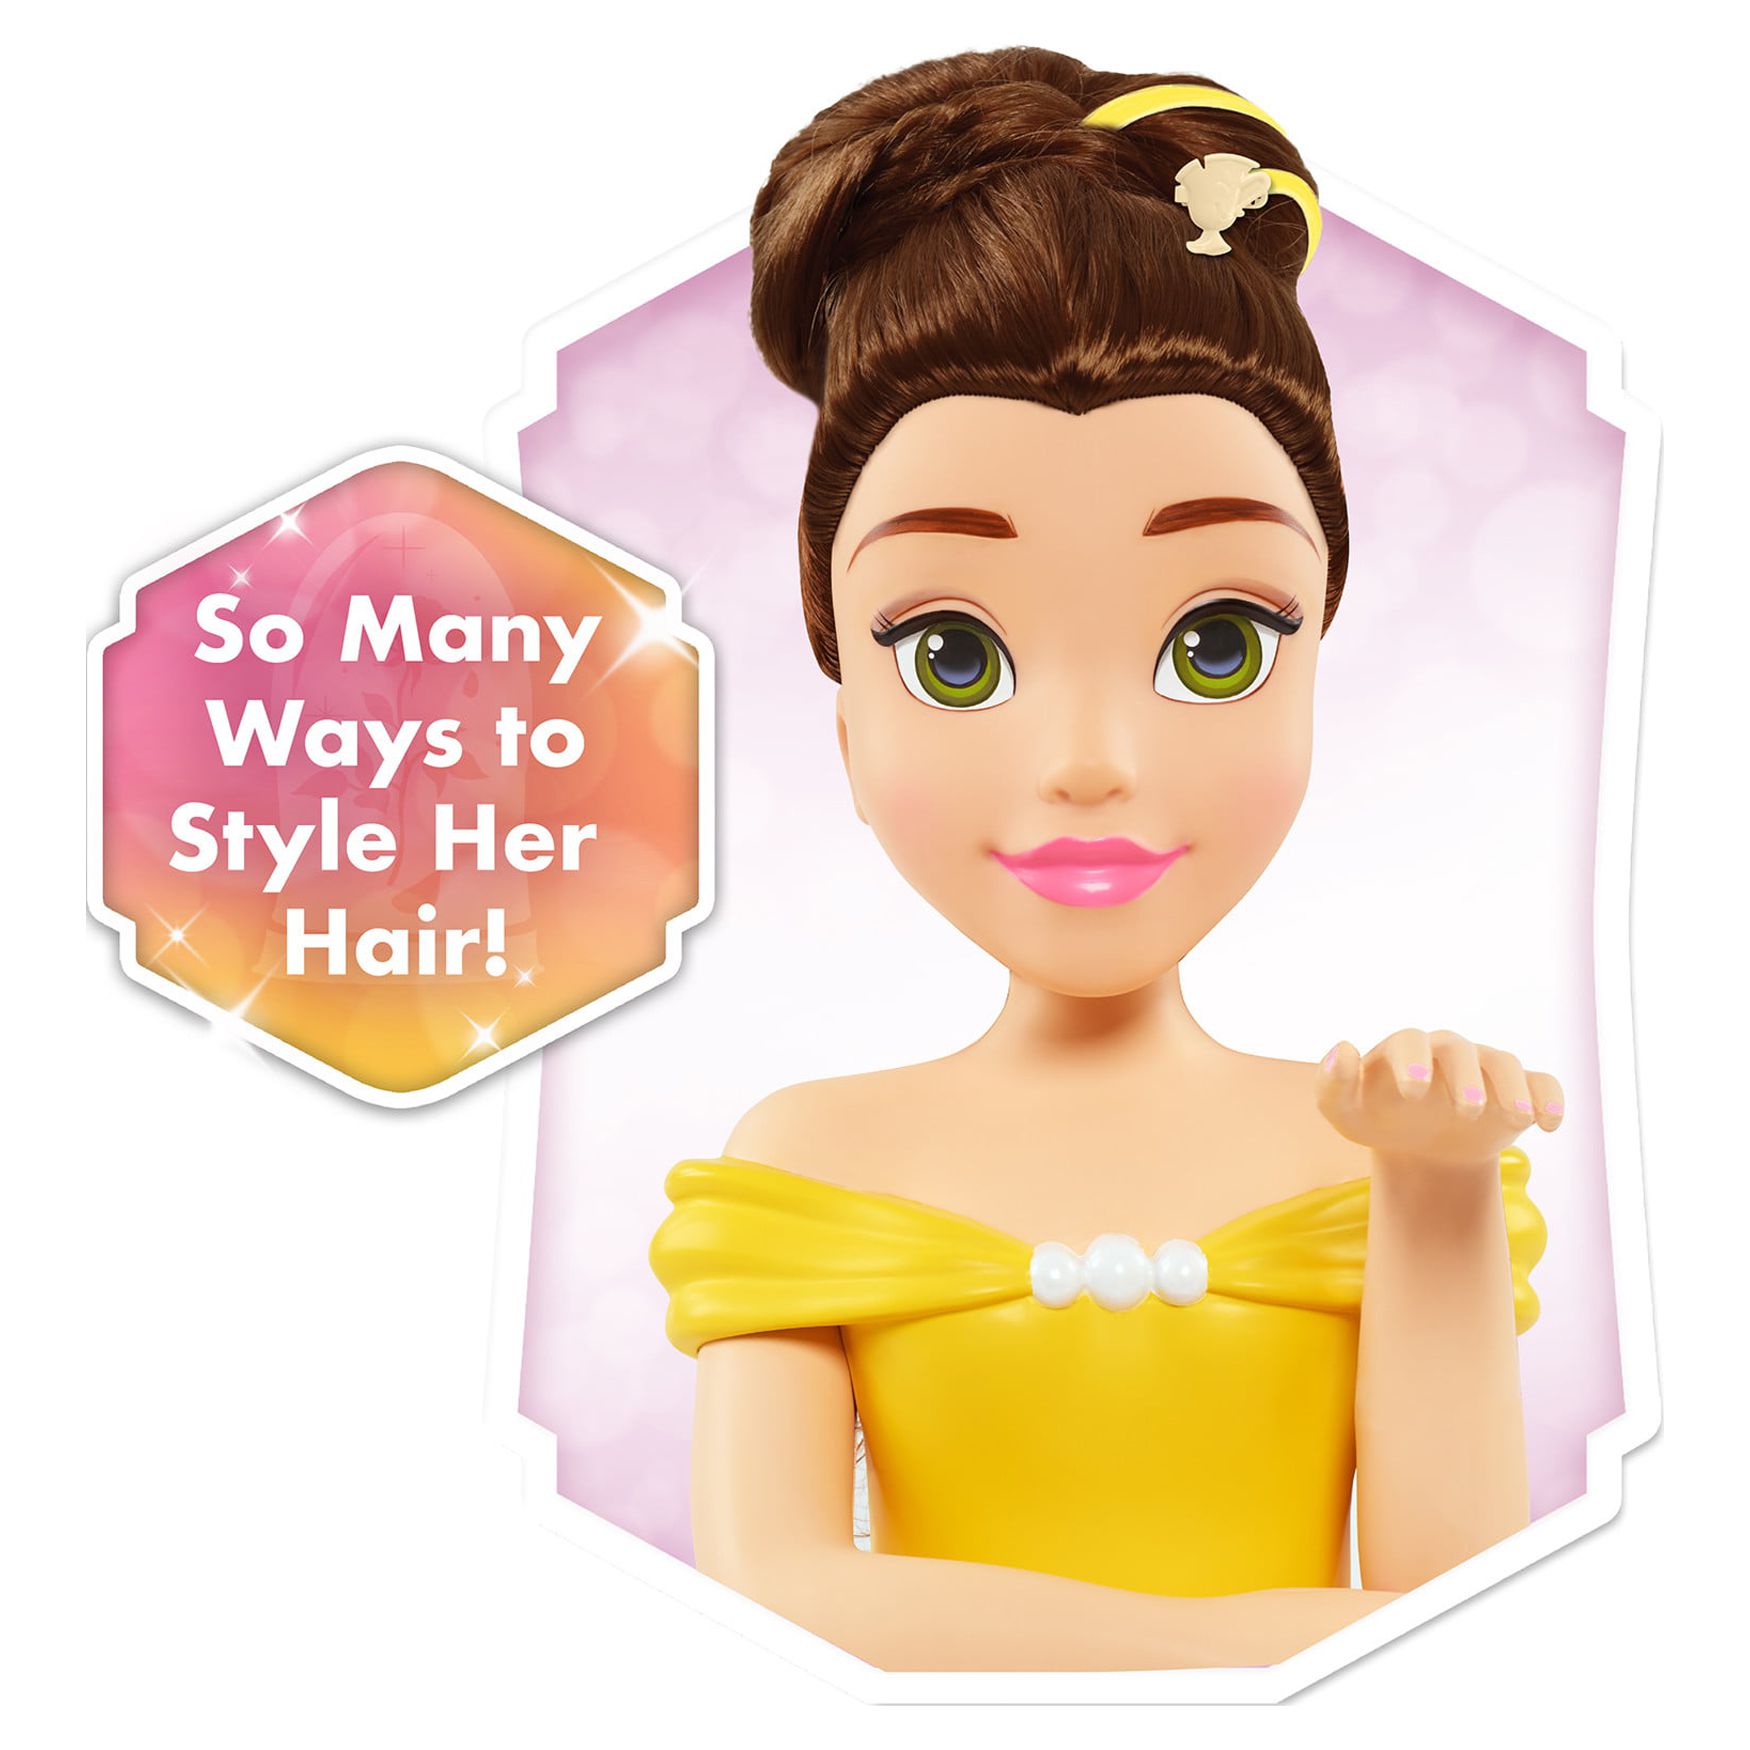 Disney Princess Deluxe Belle Styling Head, 13-pieces, Officially Licensed Kids Toys for Ages 3 Up, Gifts and Presents - image 5 of 6